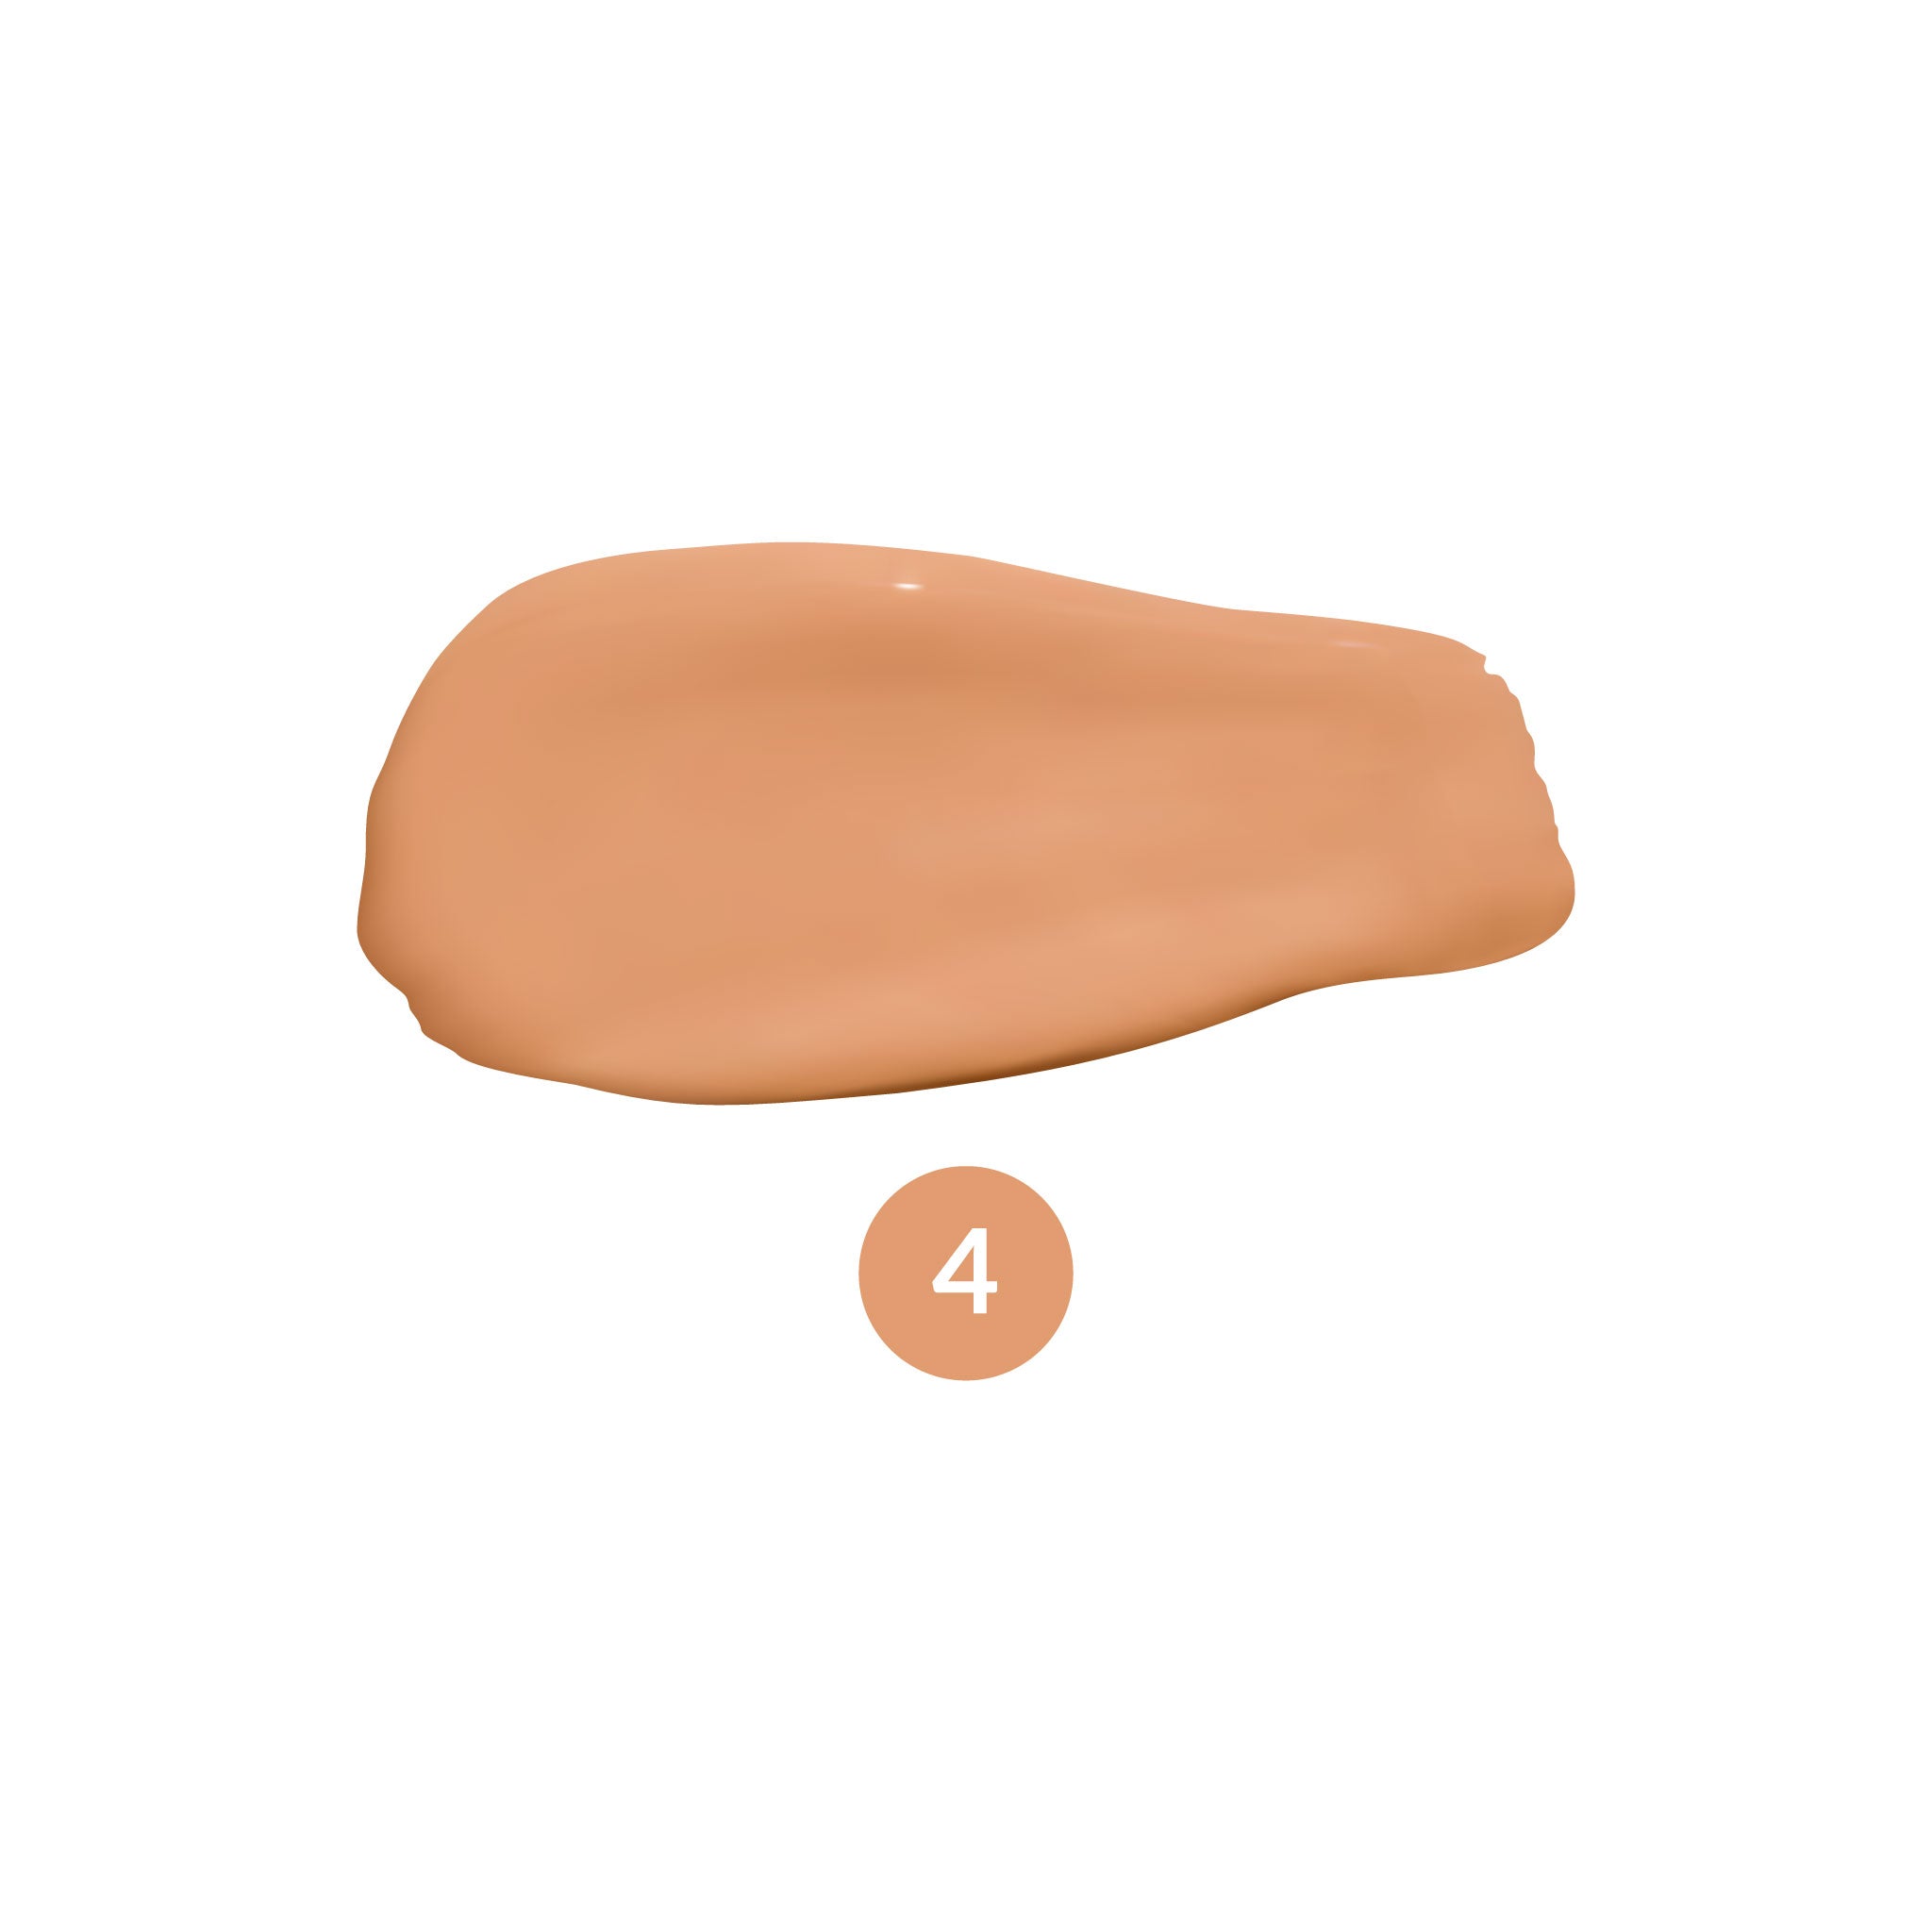 withSimplicity Liquid Foundation Swatch Shade 4